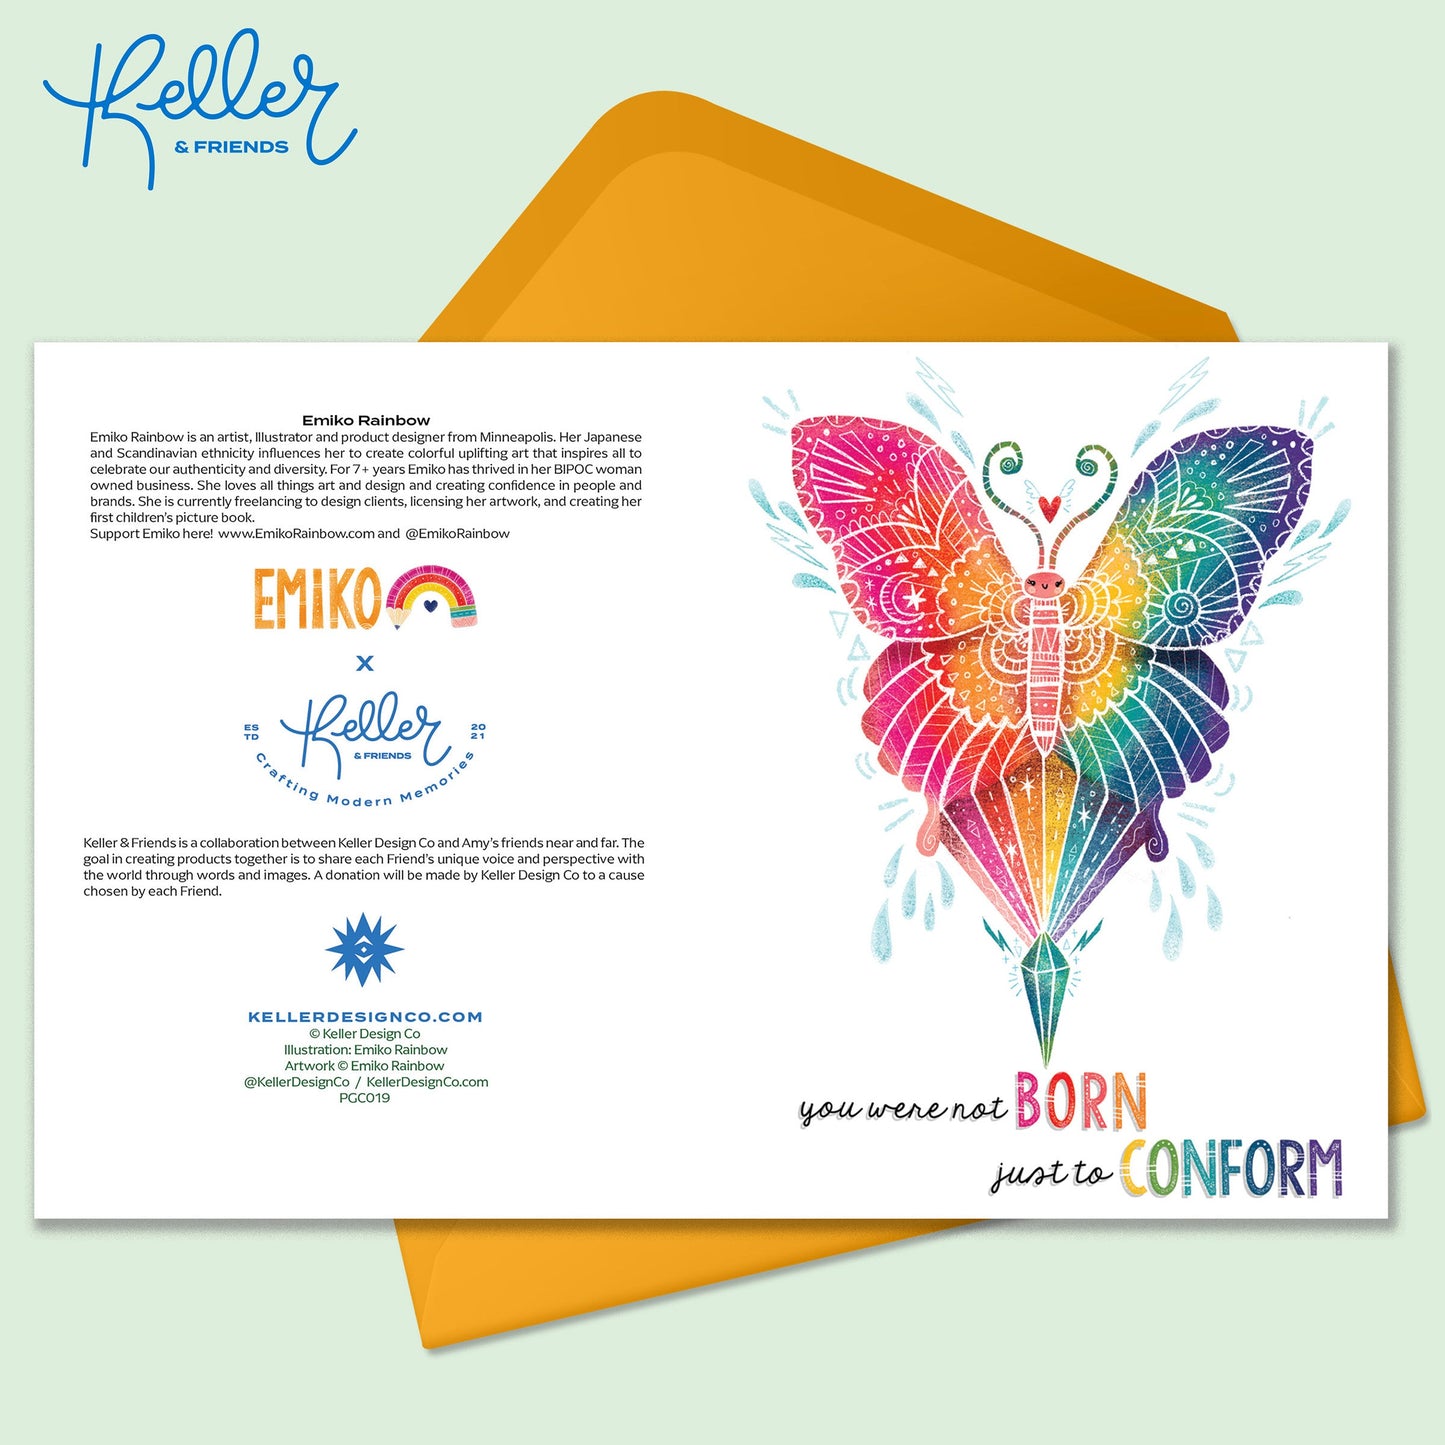 Rainbow colored butterfly image with white decorative details on a white background. The words You Were Not Born Just to Conform written on the greeting card. There is an orange envelope that sits on a mint green background.